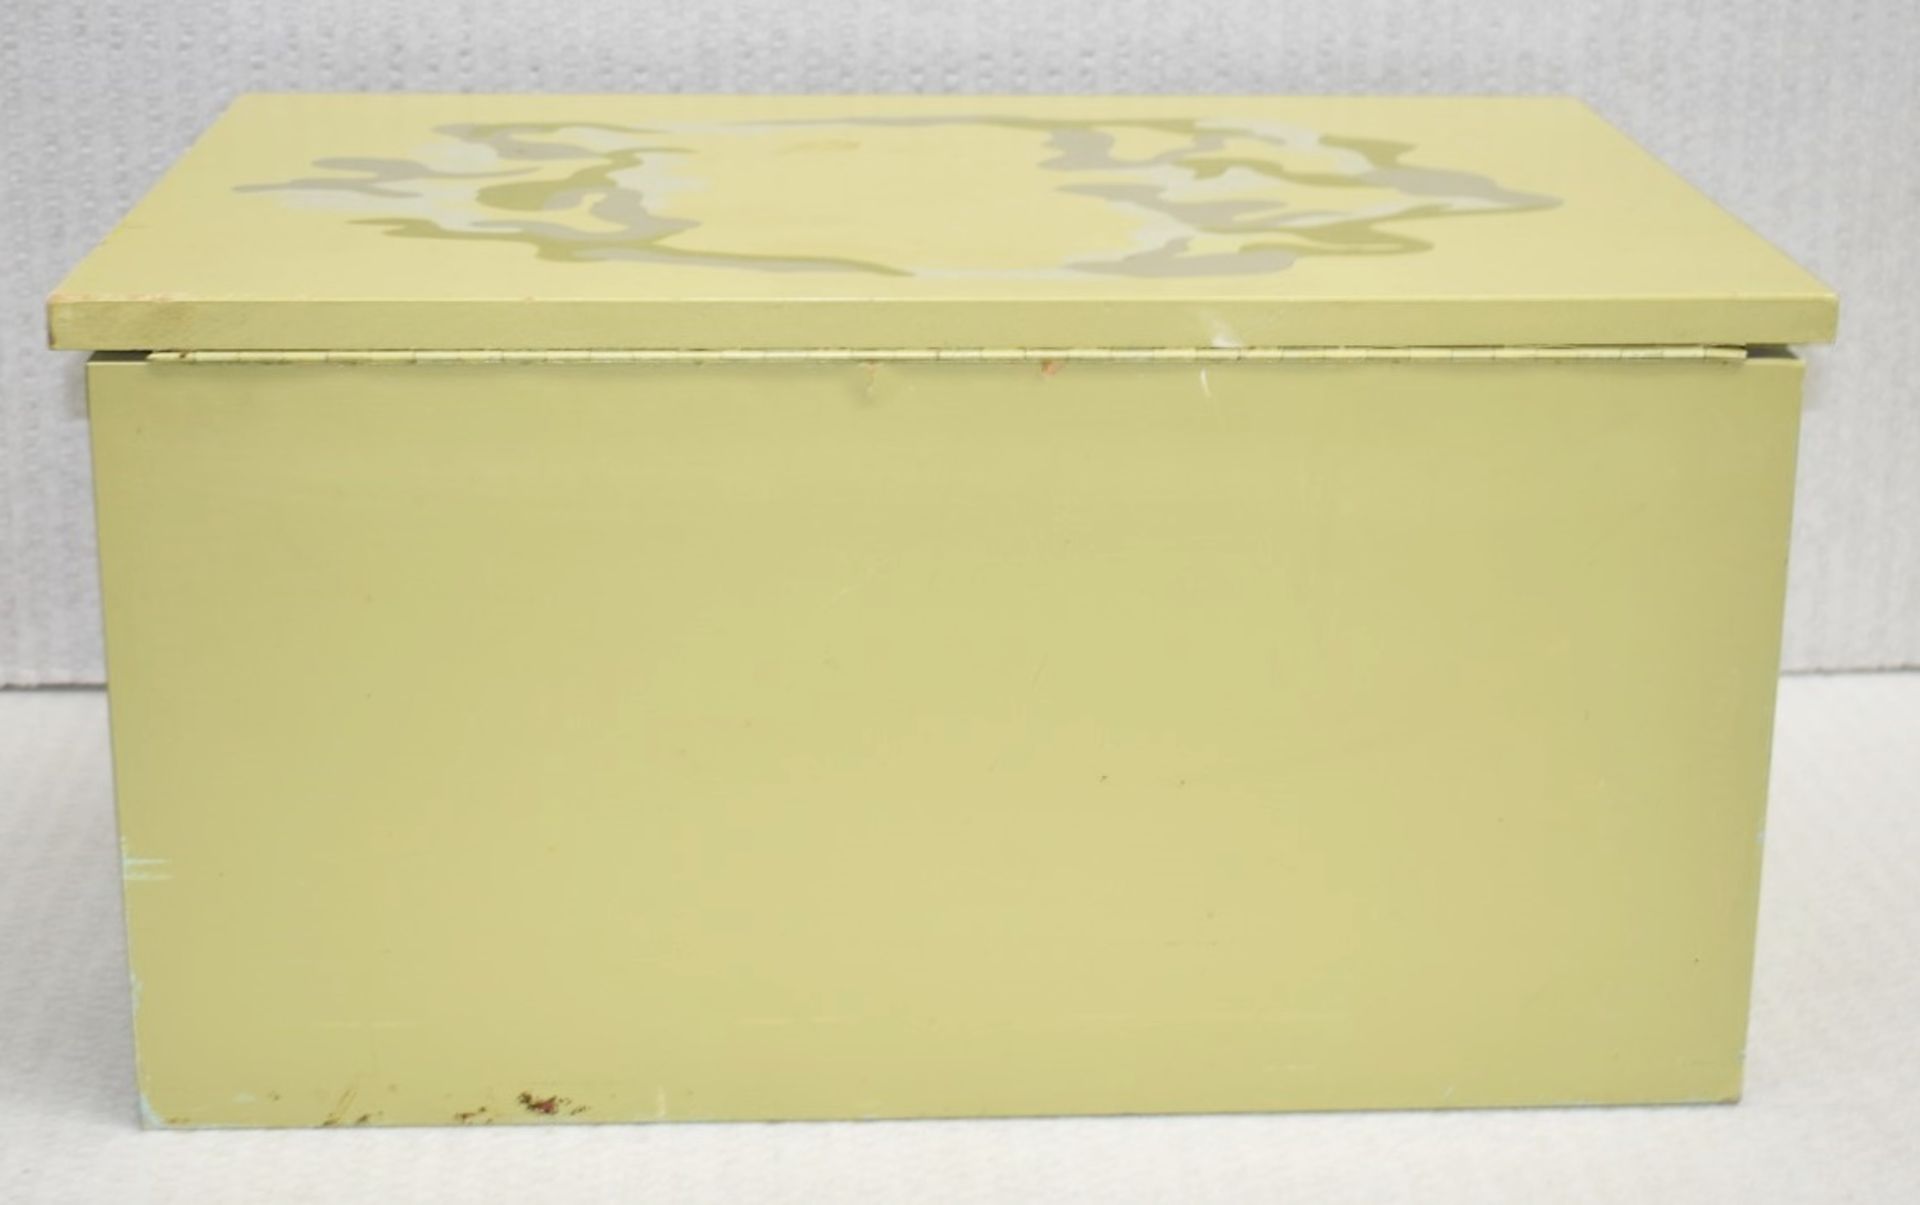 1 x Handpainted Storage Box In Olive Green - Ref: CNT740/WH2/C23 - CL845 - NO VAT ON THE HAMMER - Image 2 of 5